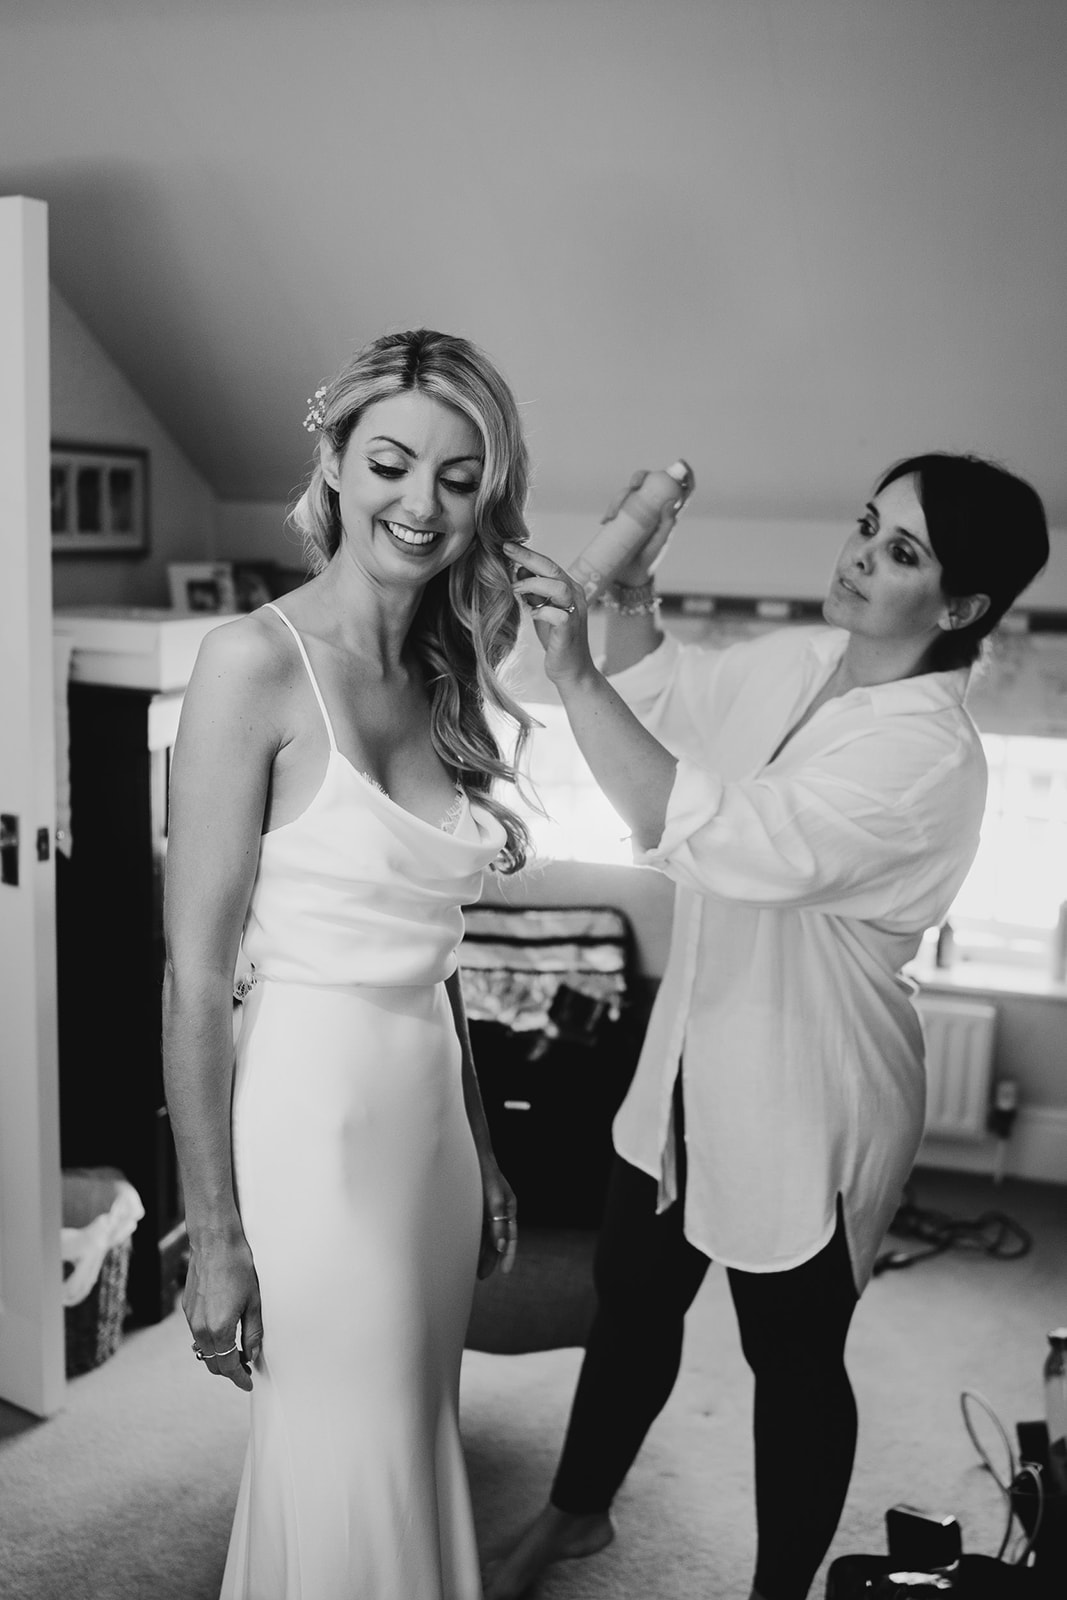 The bride having her hair styled